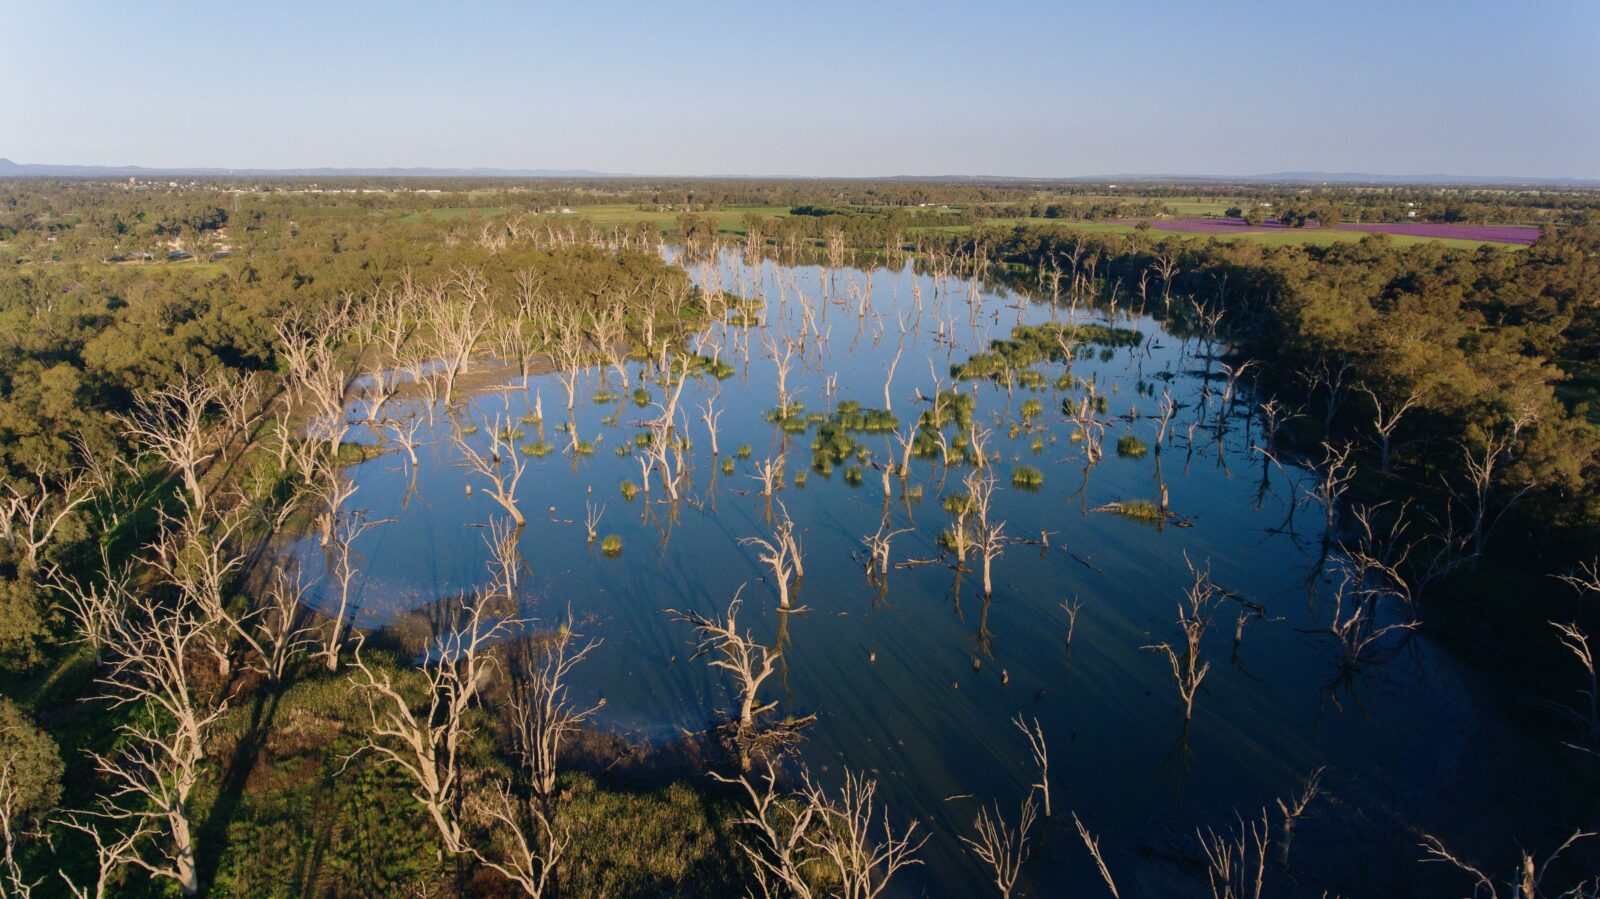 Aerial Photo of Gum Swamp showing body of water scattered with dead river gum trees.